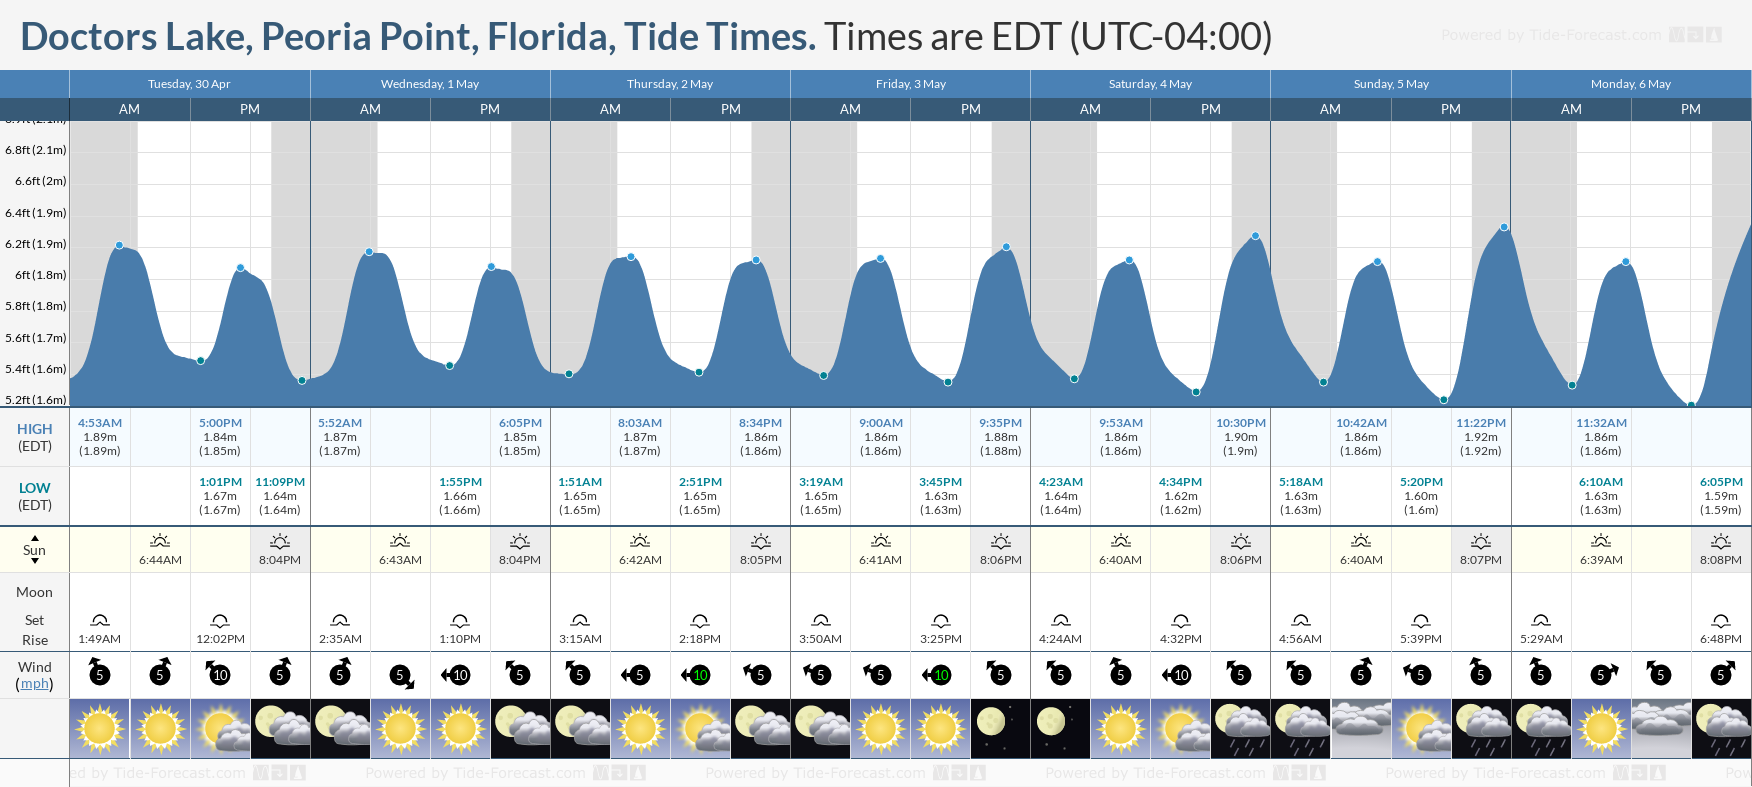 Doctors Lake, Peoria Point, Florida Tide Chart including high and low tide tide times for the next 7 days